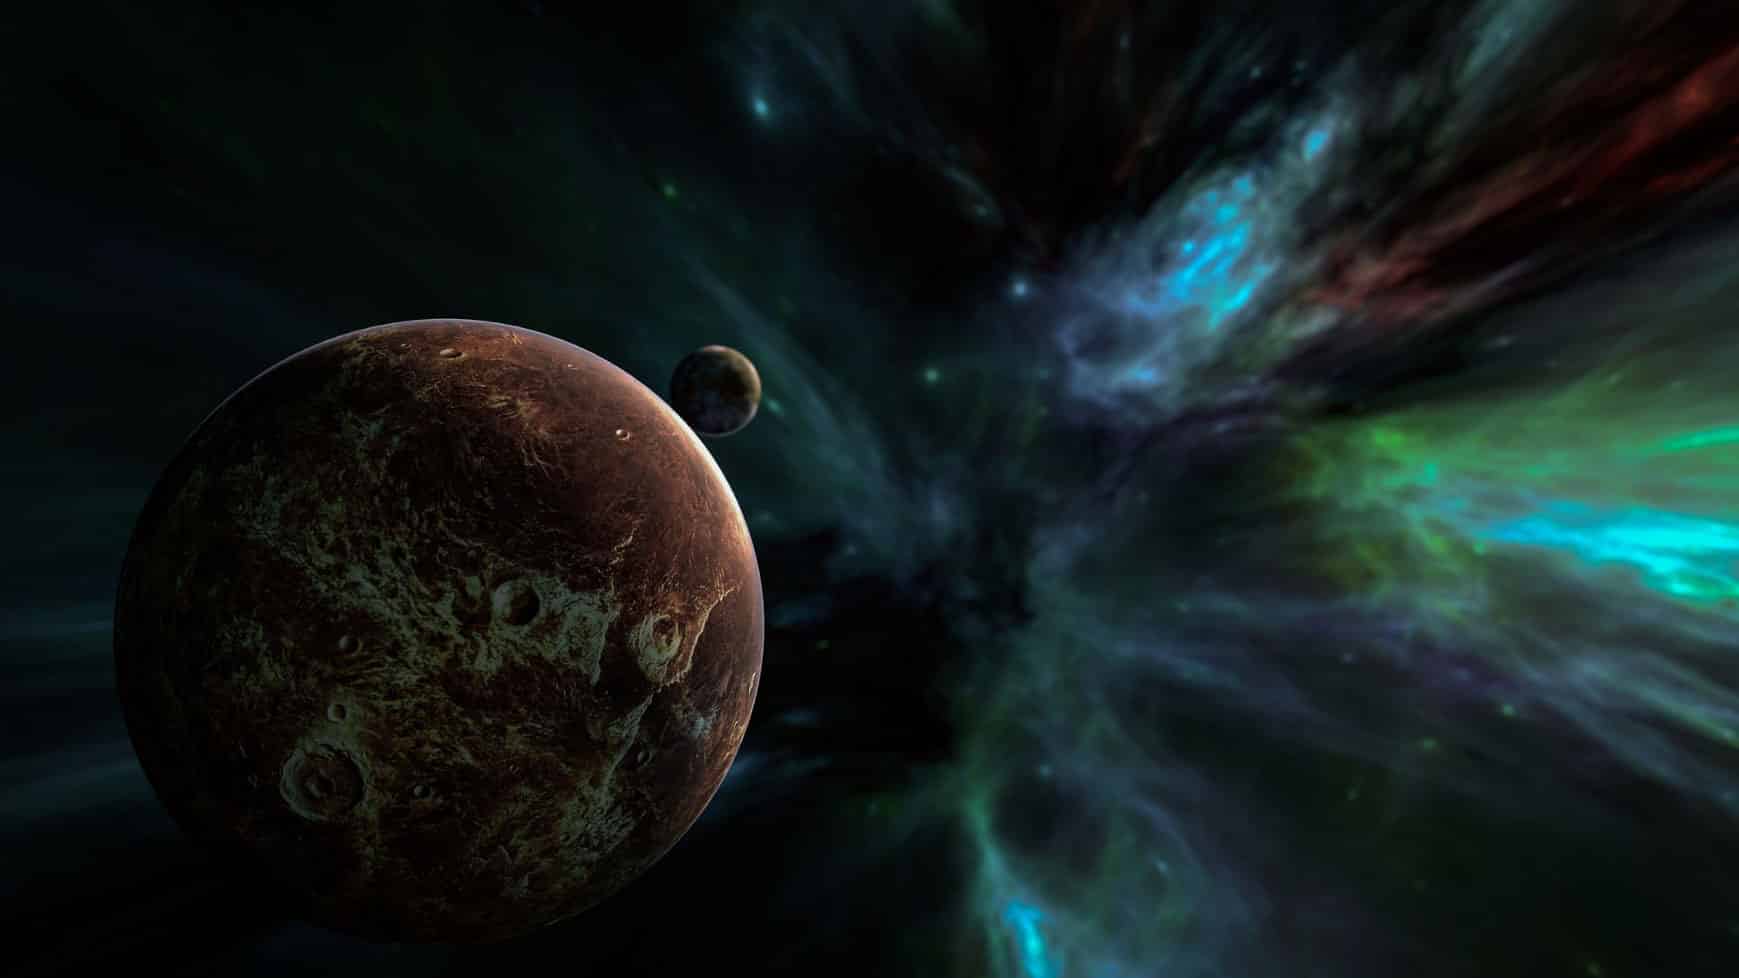 Image illustrating space with two planetary objects